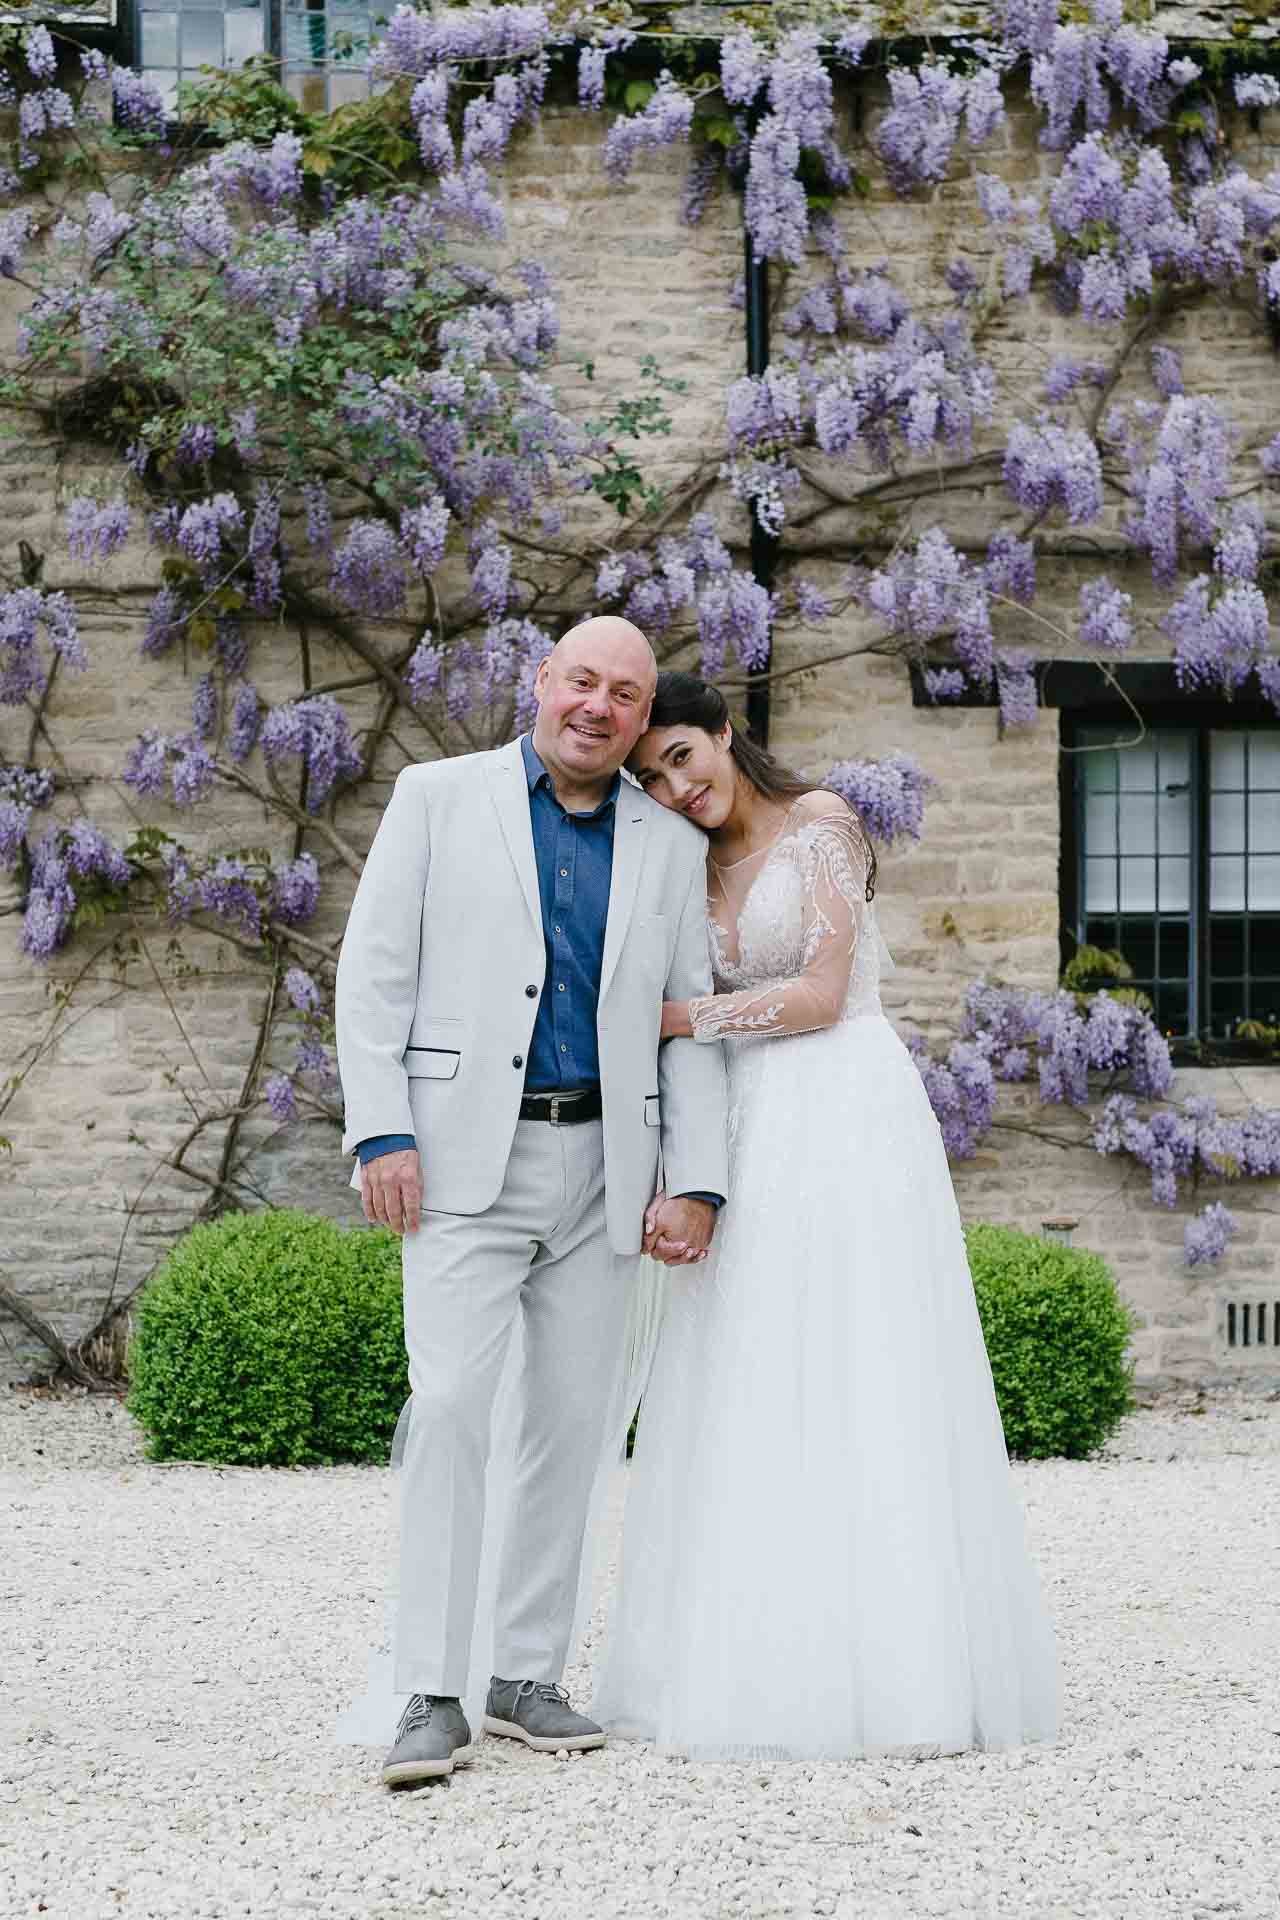 Nadia hugging Adrian during their couple's photoshoot in front of the wisteria hanging across Minster Mill. Photo by Des Dubber Photography, videography by Veiled Productions.